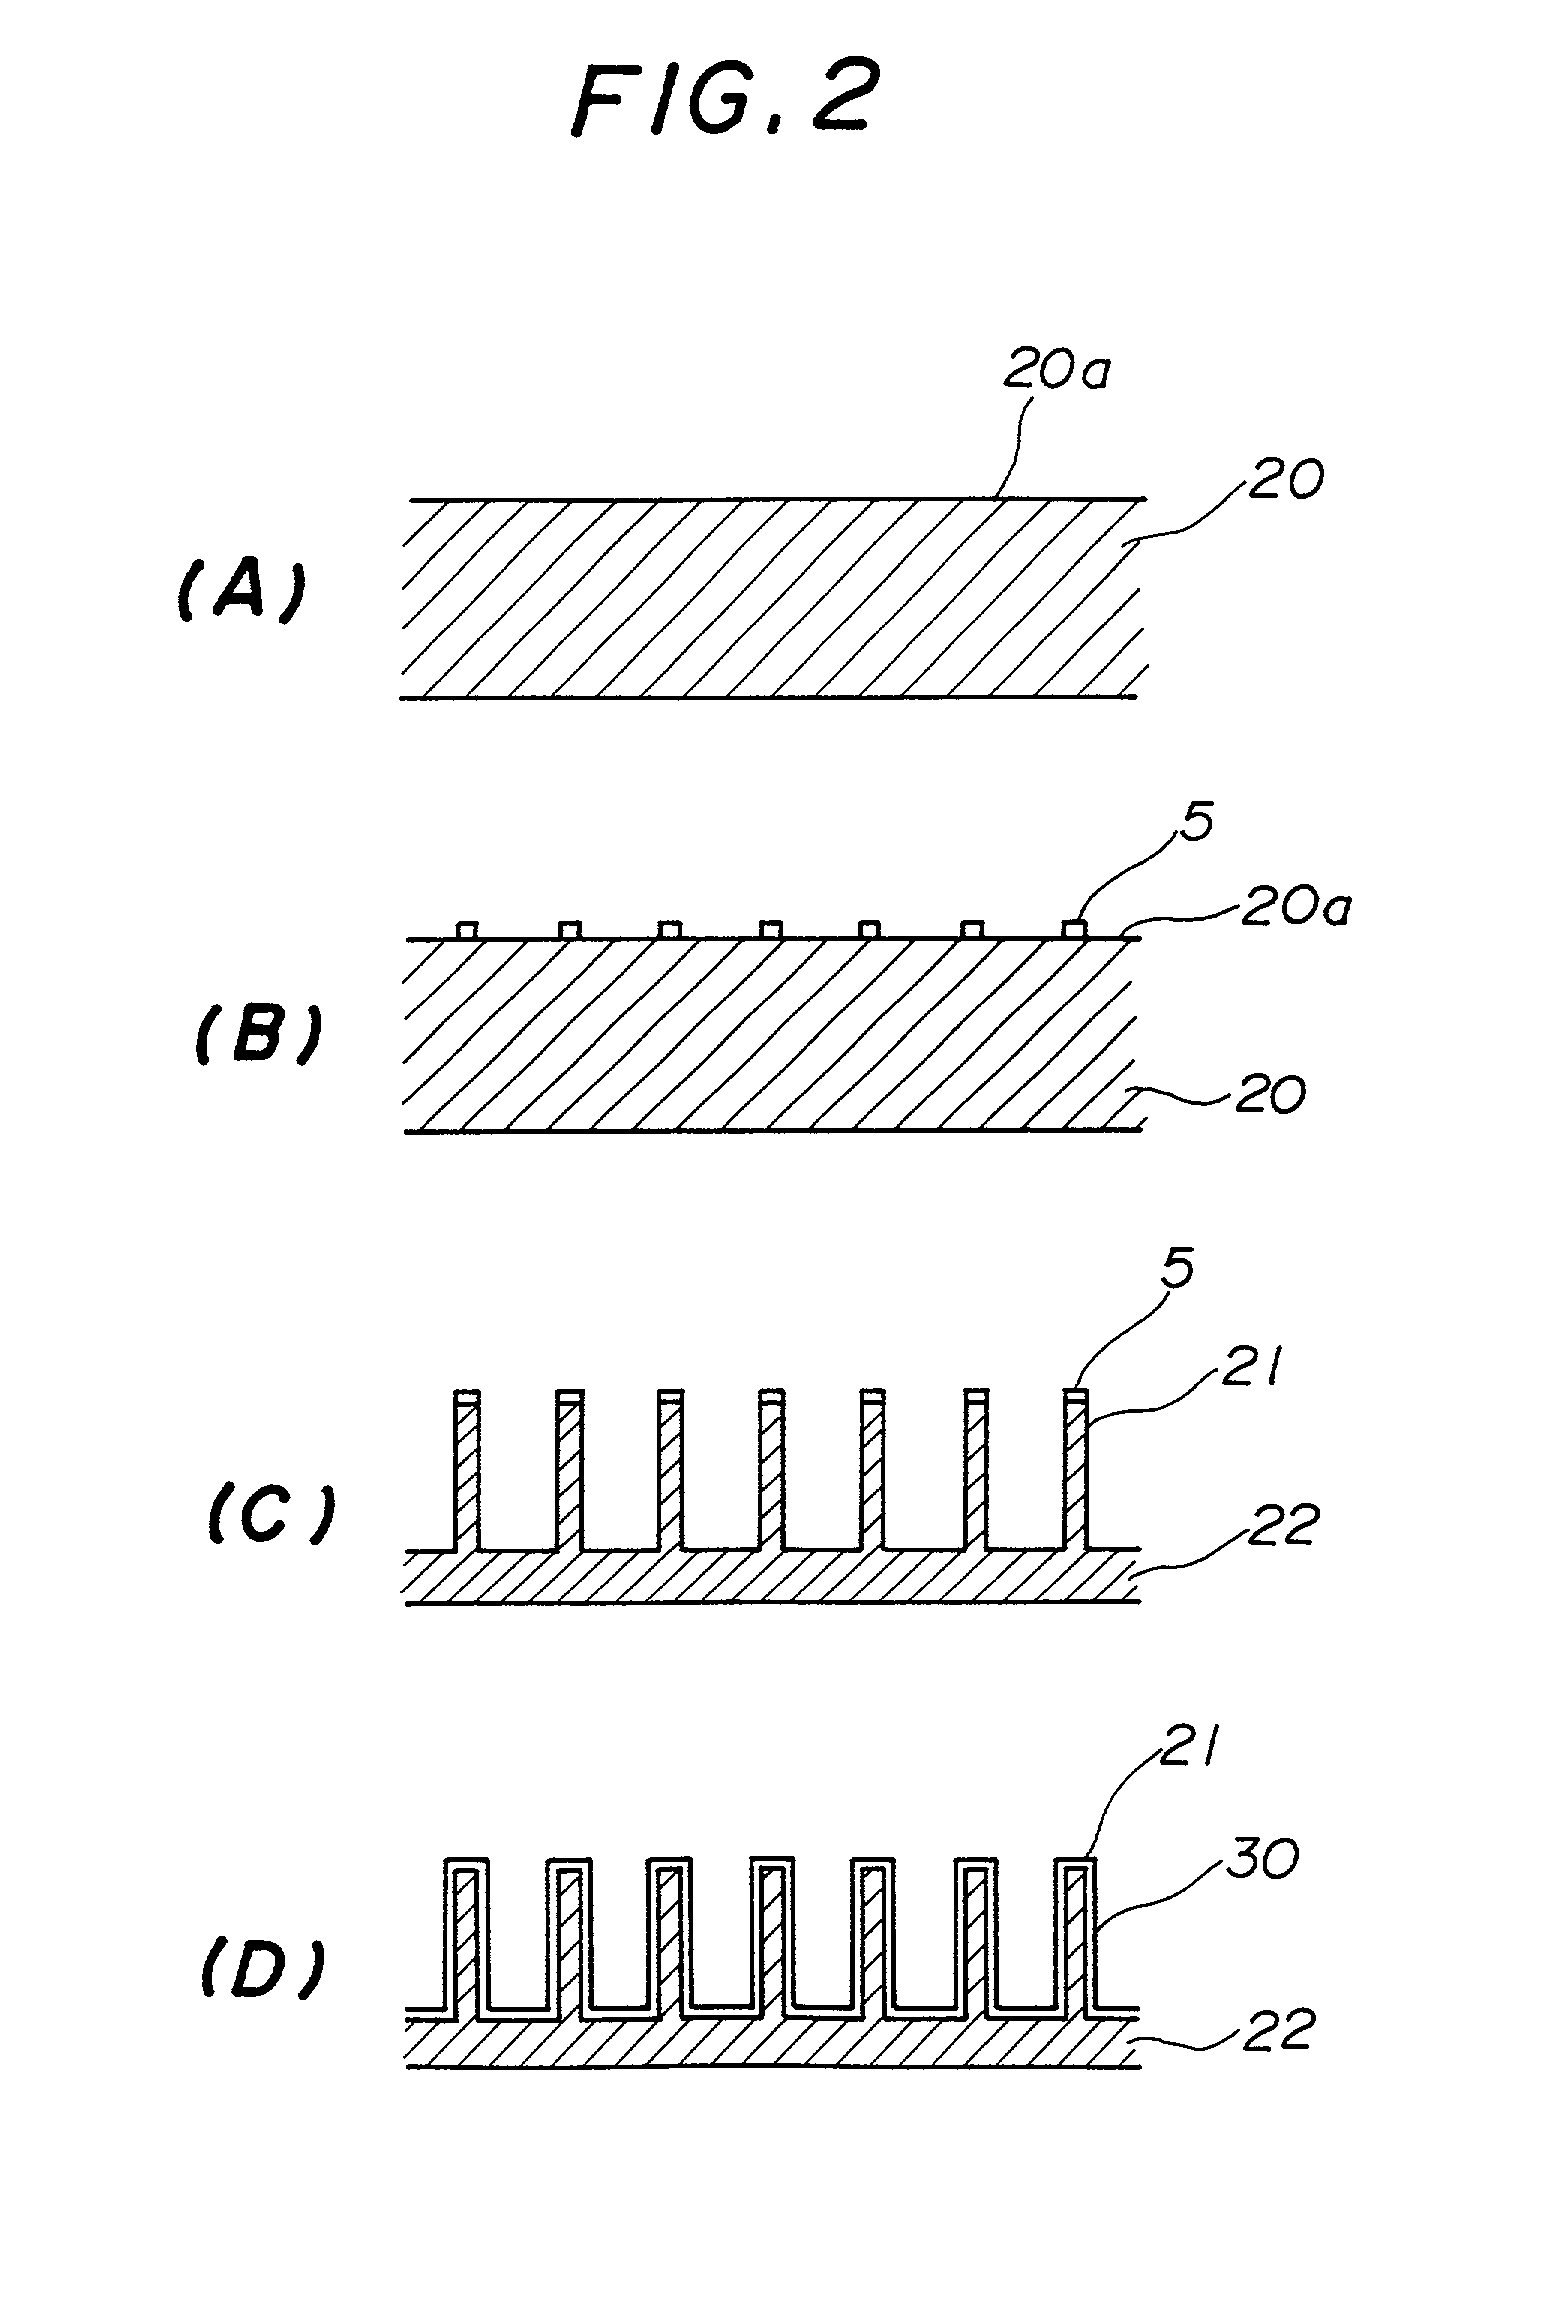 Front-and-back electrically conductive substrate